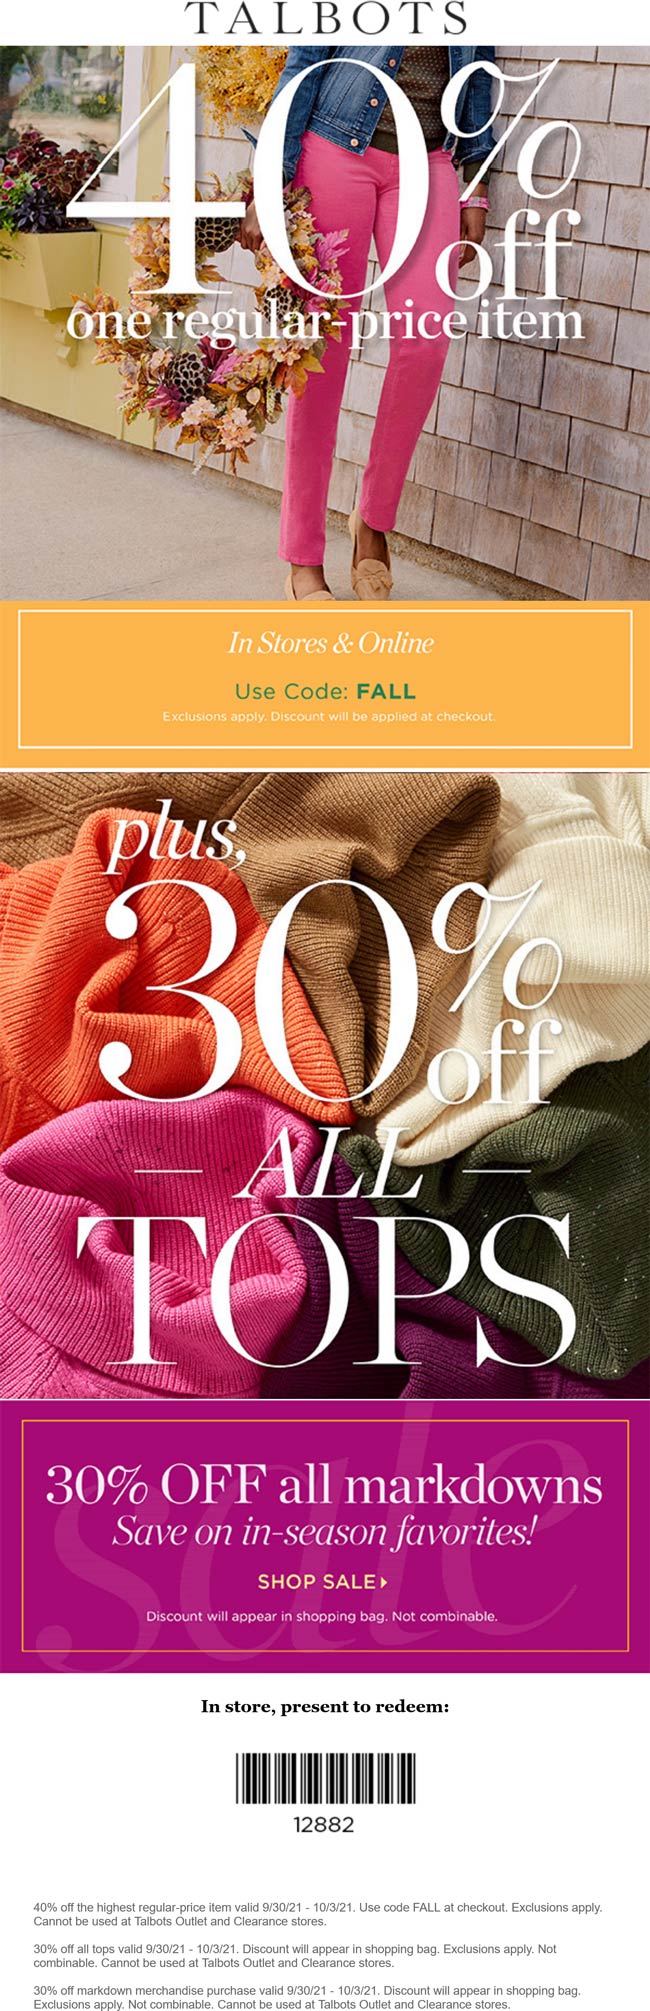 Talbots stores Coupon  40% off a single item & more at Talbots, or online via promo code FALL #talbots 